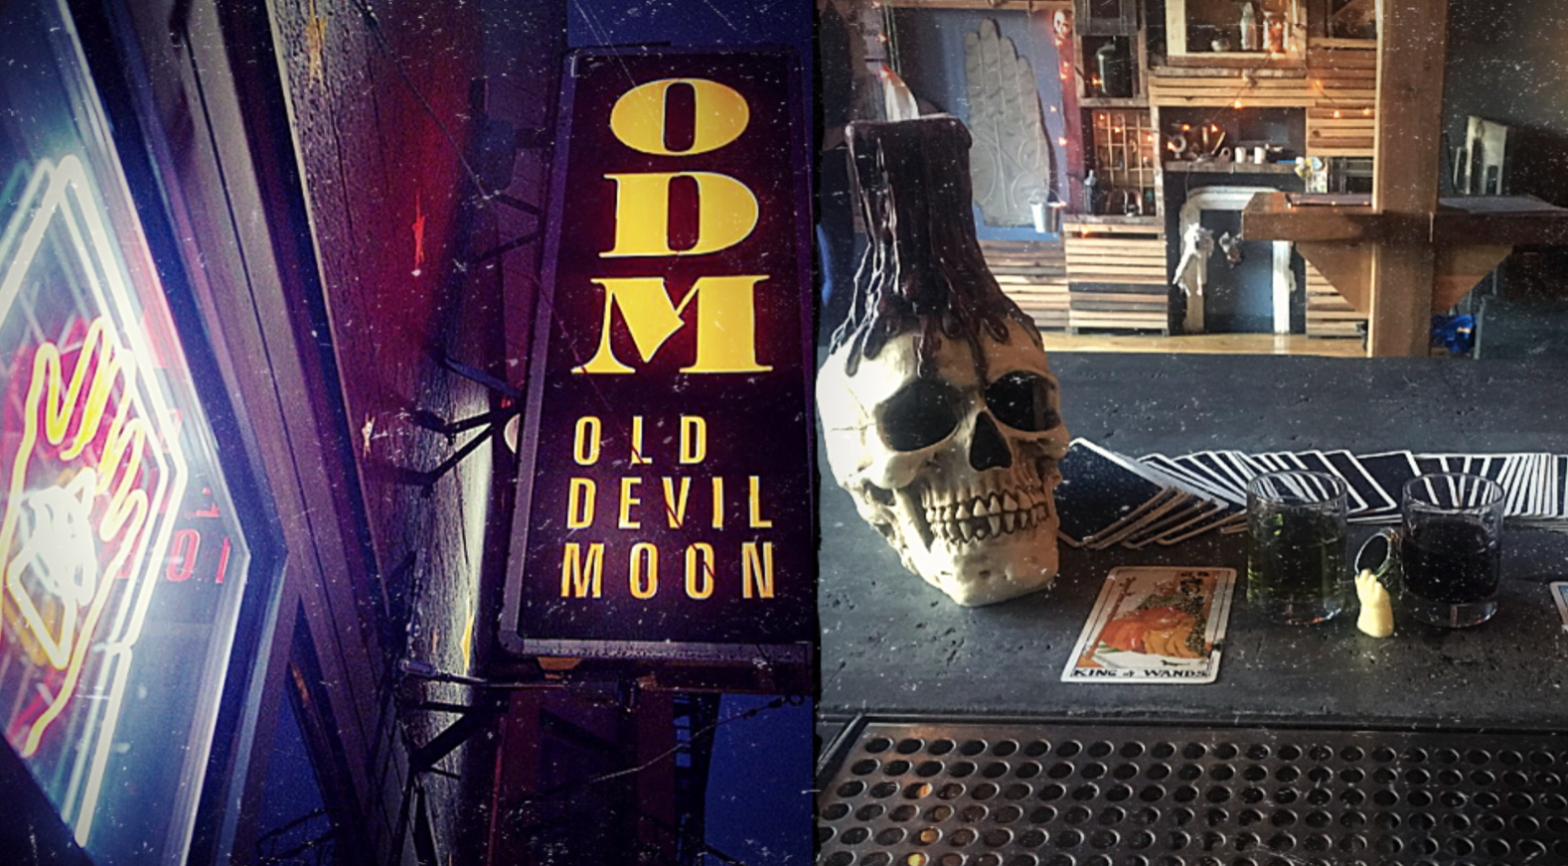 Black magic and craft beer combine to create a mystical and dark bar in San Francisco: Old Devil Moon